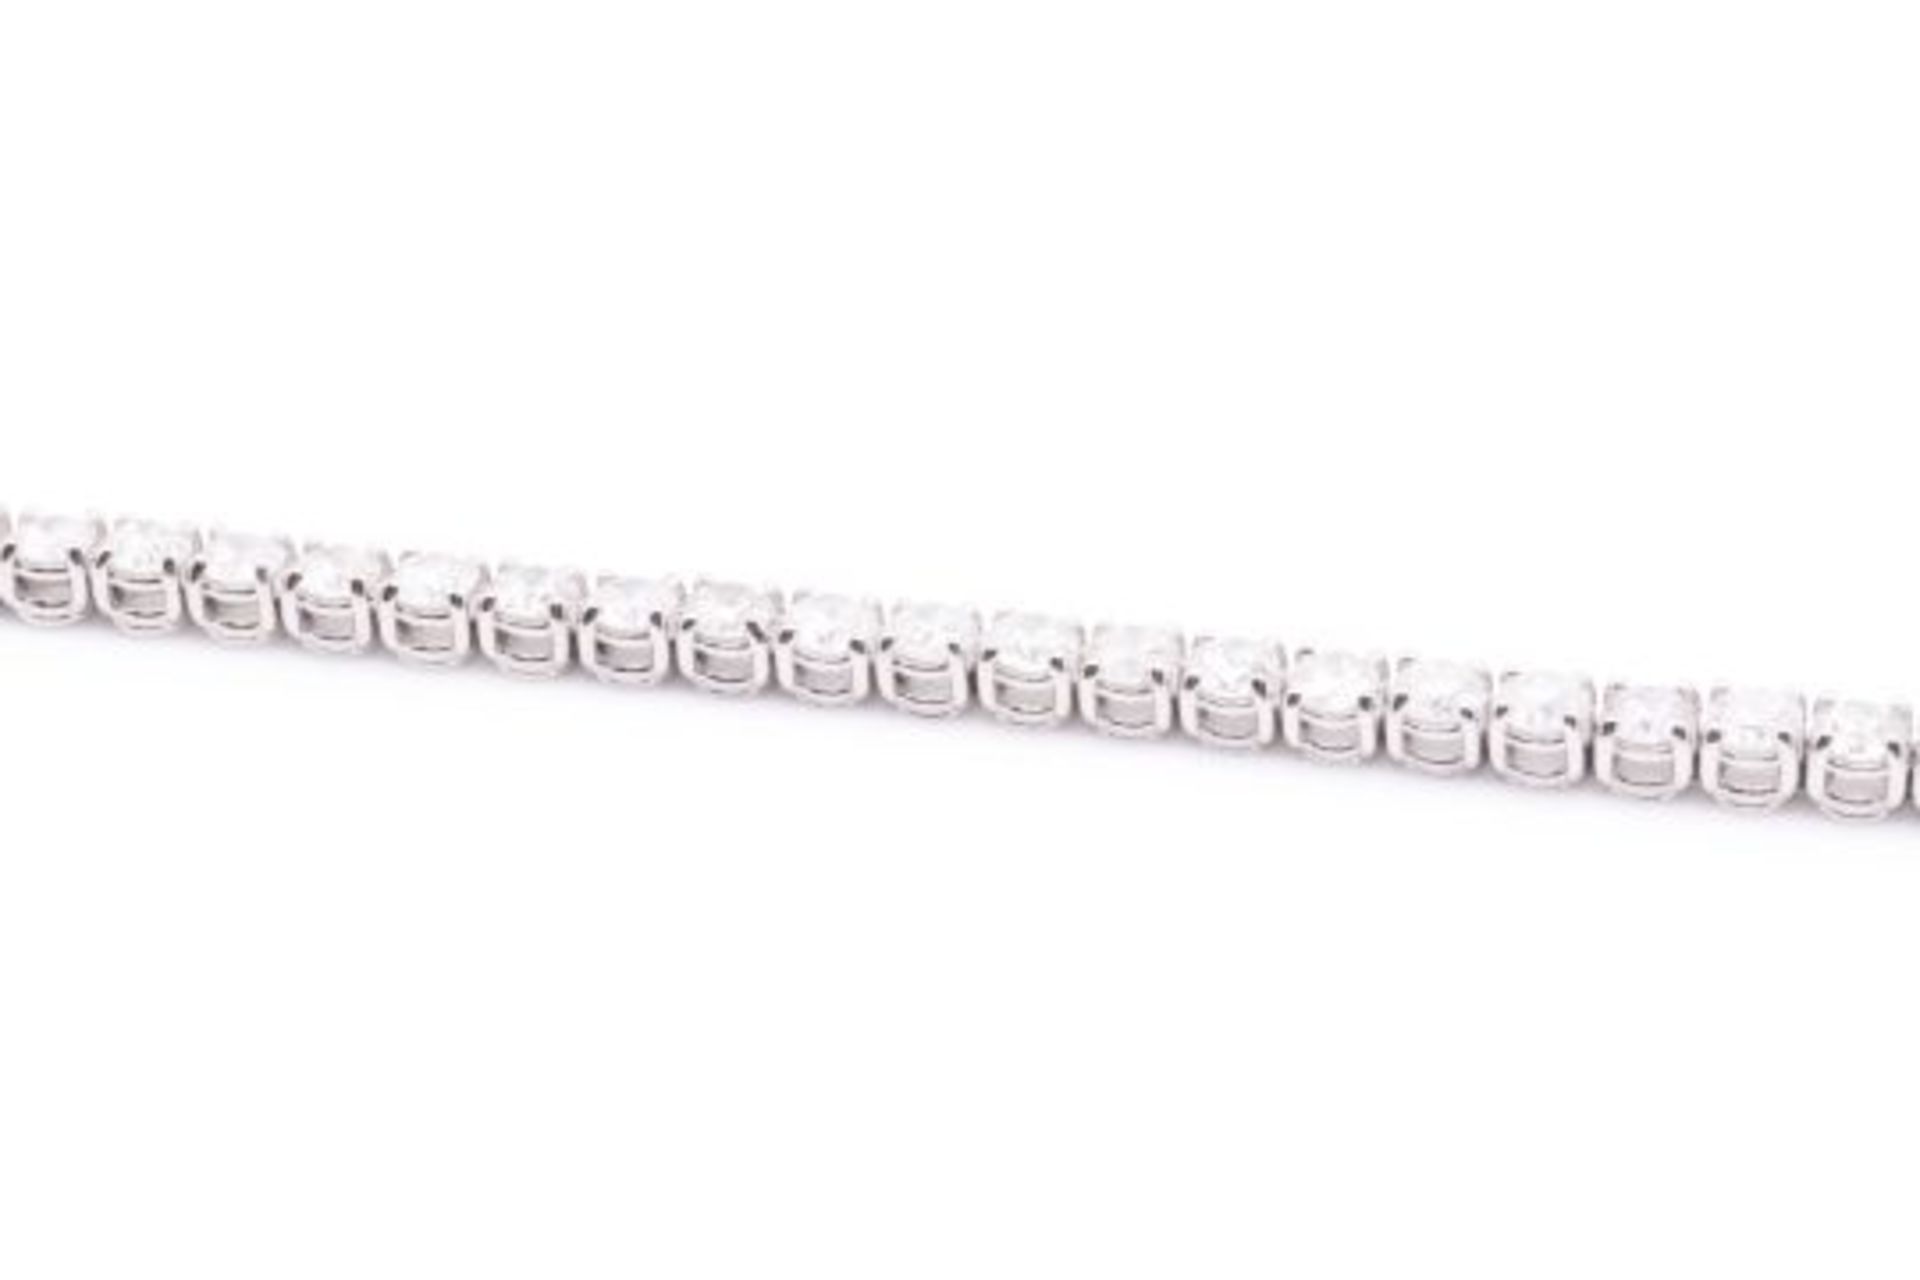 ** ON SALE ** 'Brand New' 9.0 Carat 18ct White Gold Tennis Bracelet set with Round Brilliant Cut - Image 3 of 7